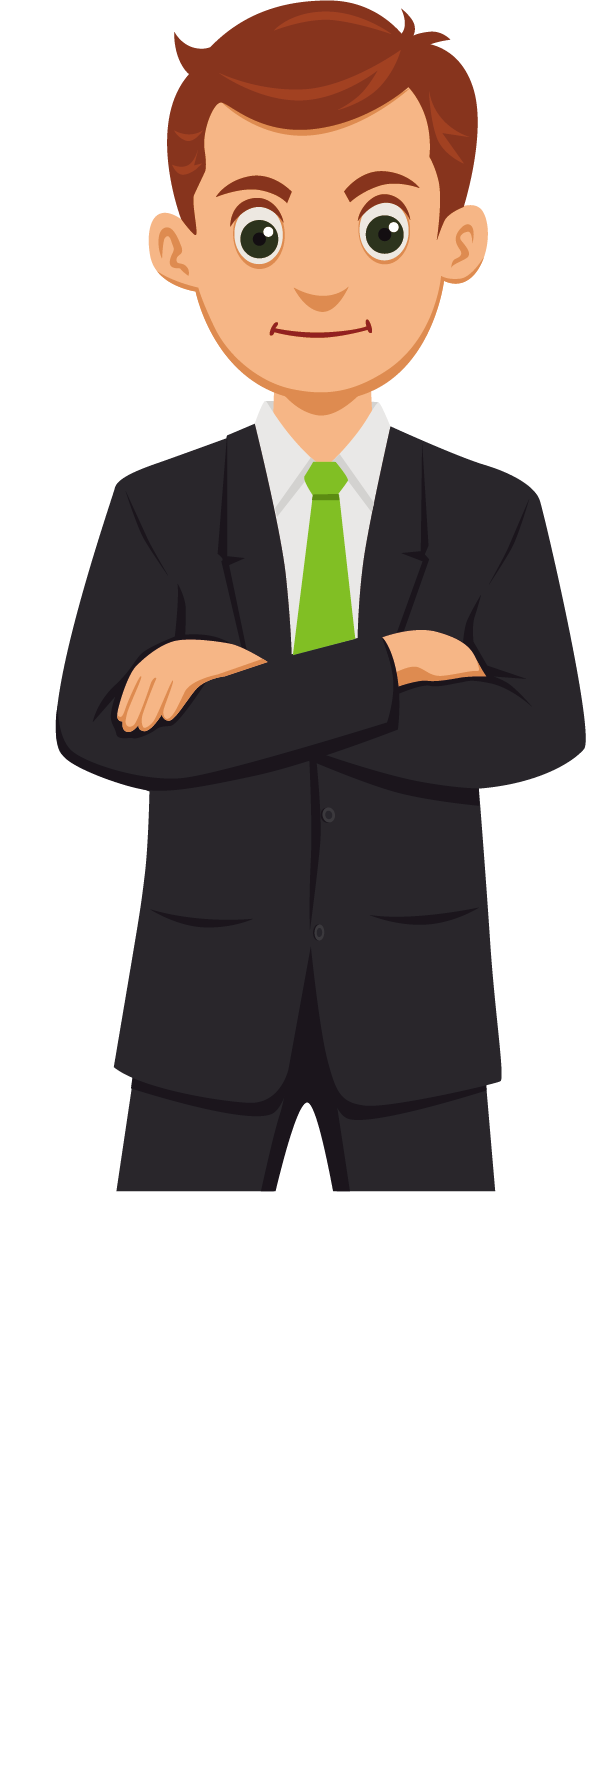 Commerce Vector Cartoon Business Man HQ Image Free PNG Clipart